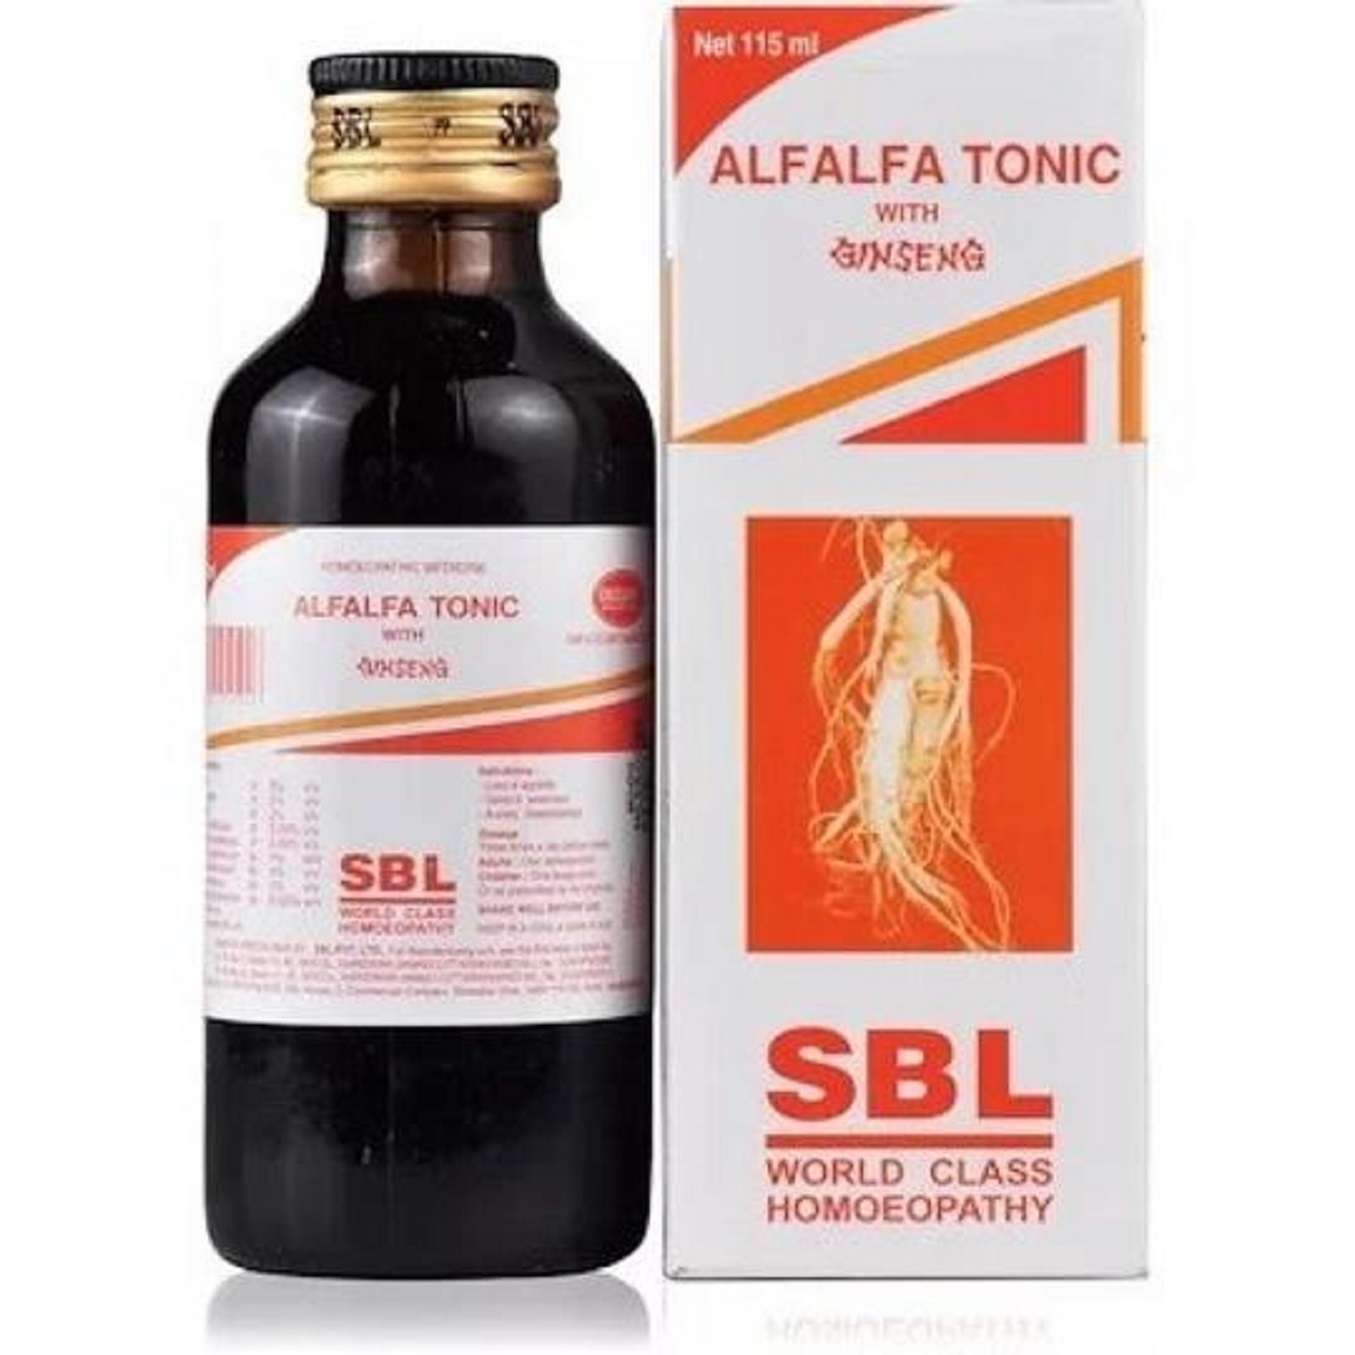 SBL Alfalfa Tonic with Ginseng Homeopathic Medicine style=